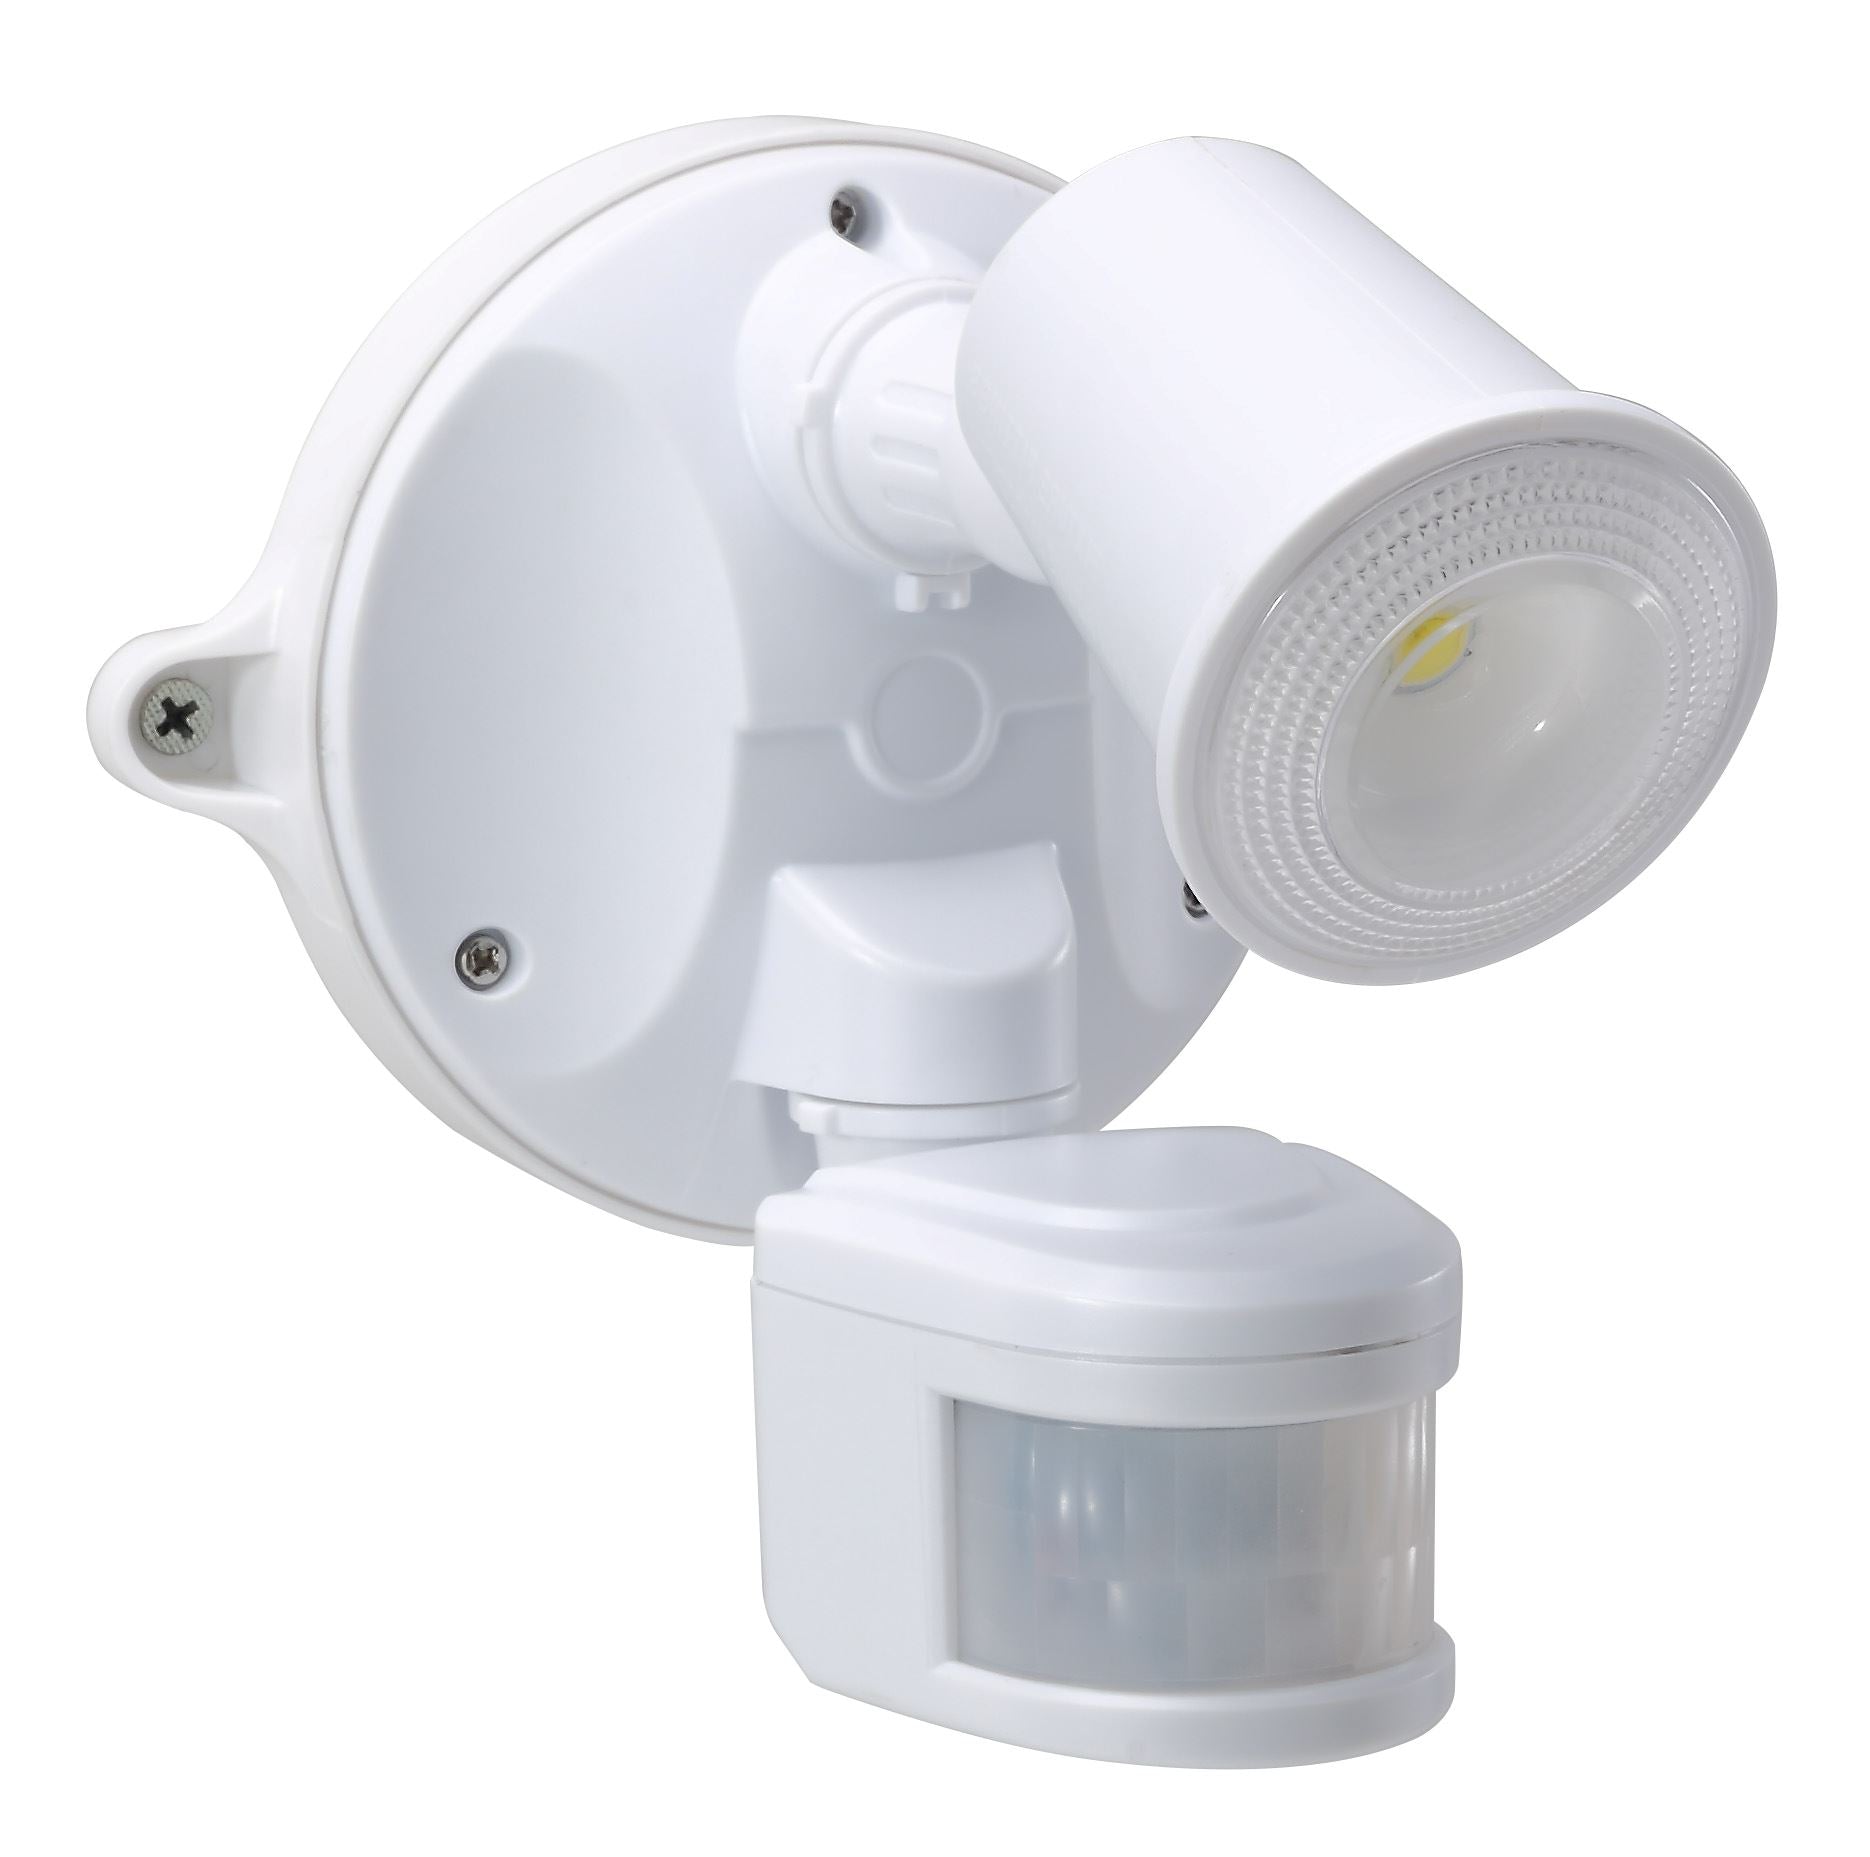 HOUSEWATCH_10W_Single_LED_Spotlight_with_Motion_Sensor._IP54._Passive_IR._9m_(Side)_&_12m_(Front)_Detection_Range._Detection_Angle_140_Degree._Includes_Timing_&_Lux_Adjustments,_Screws._White_Colour